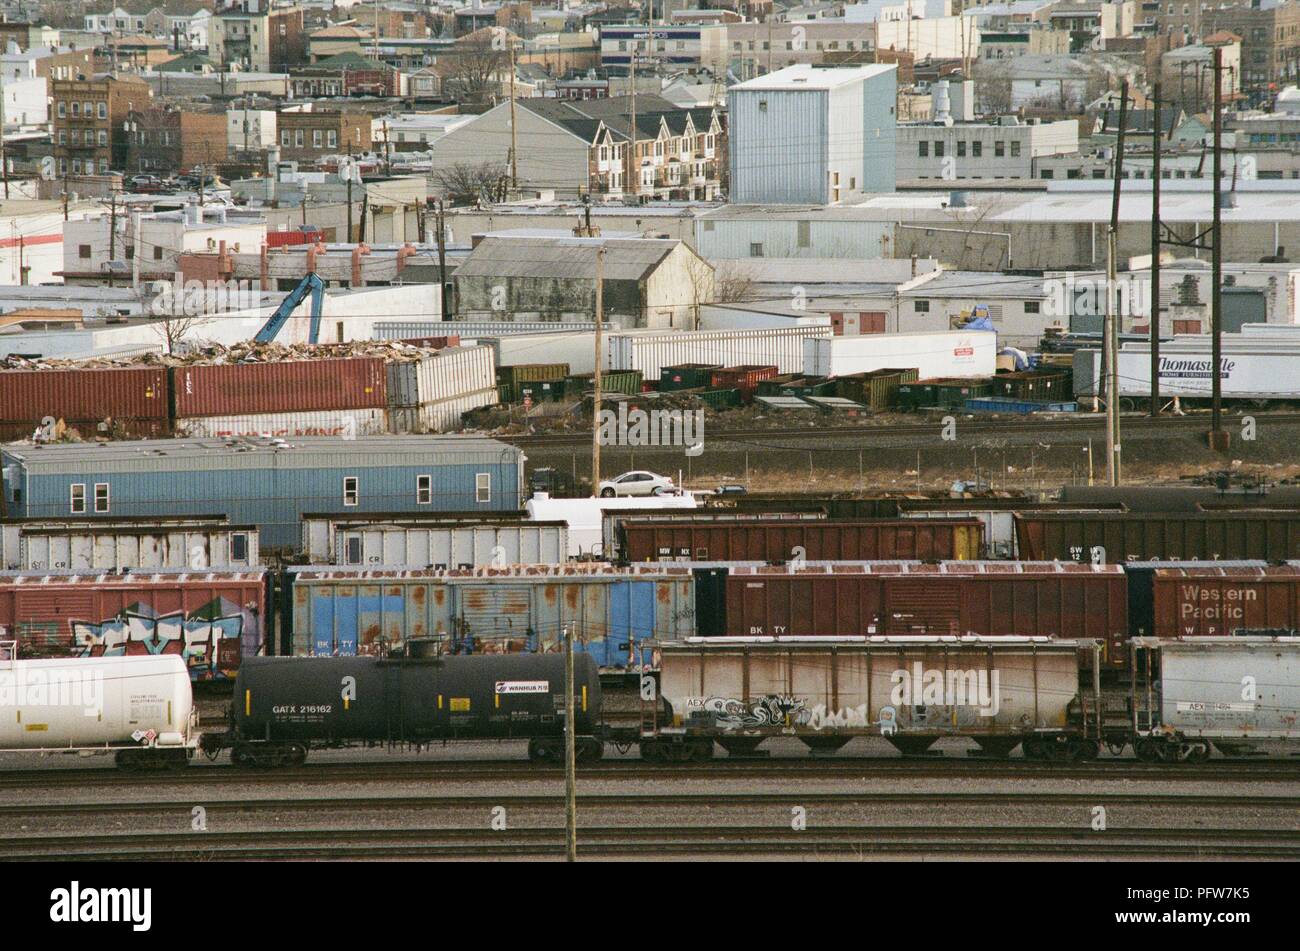 Aerial view, close-up of row homes bordering on a rail yard, with freight trains visible, in an industrial portion of Newark, New Jersey, March 18, 2018. () Stock Photo